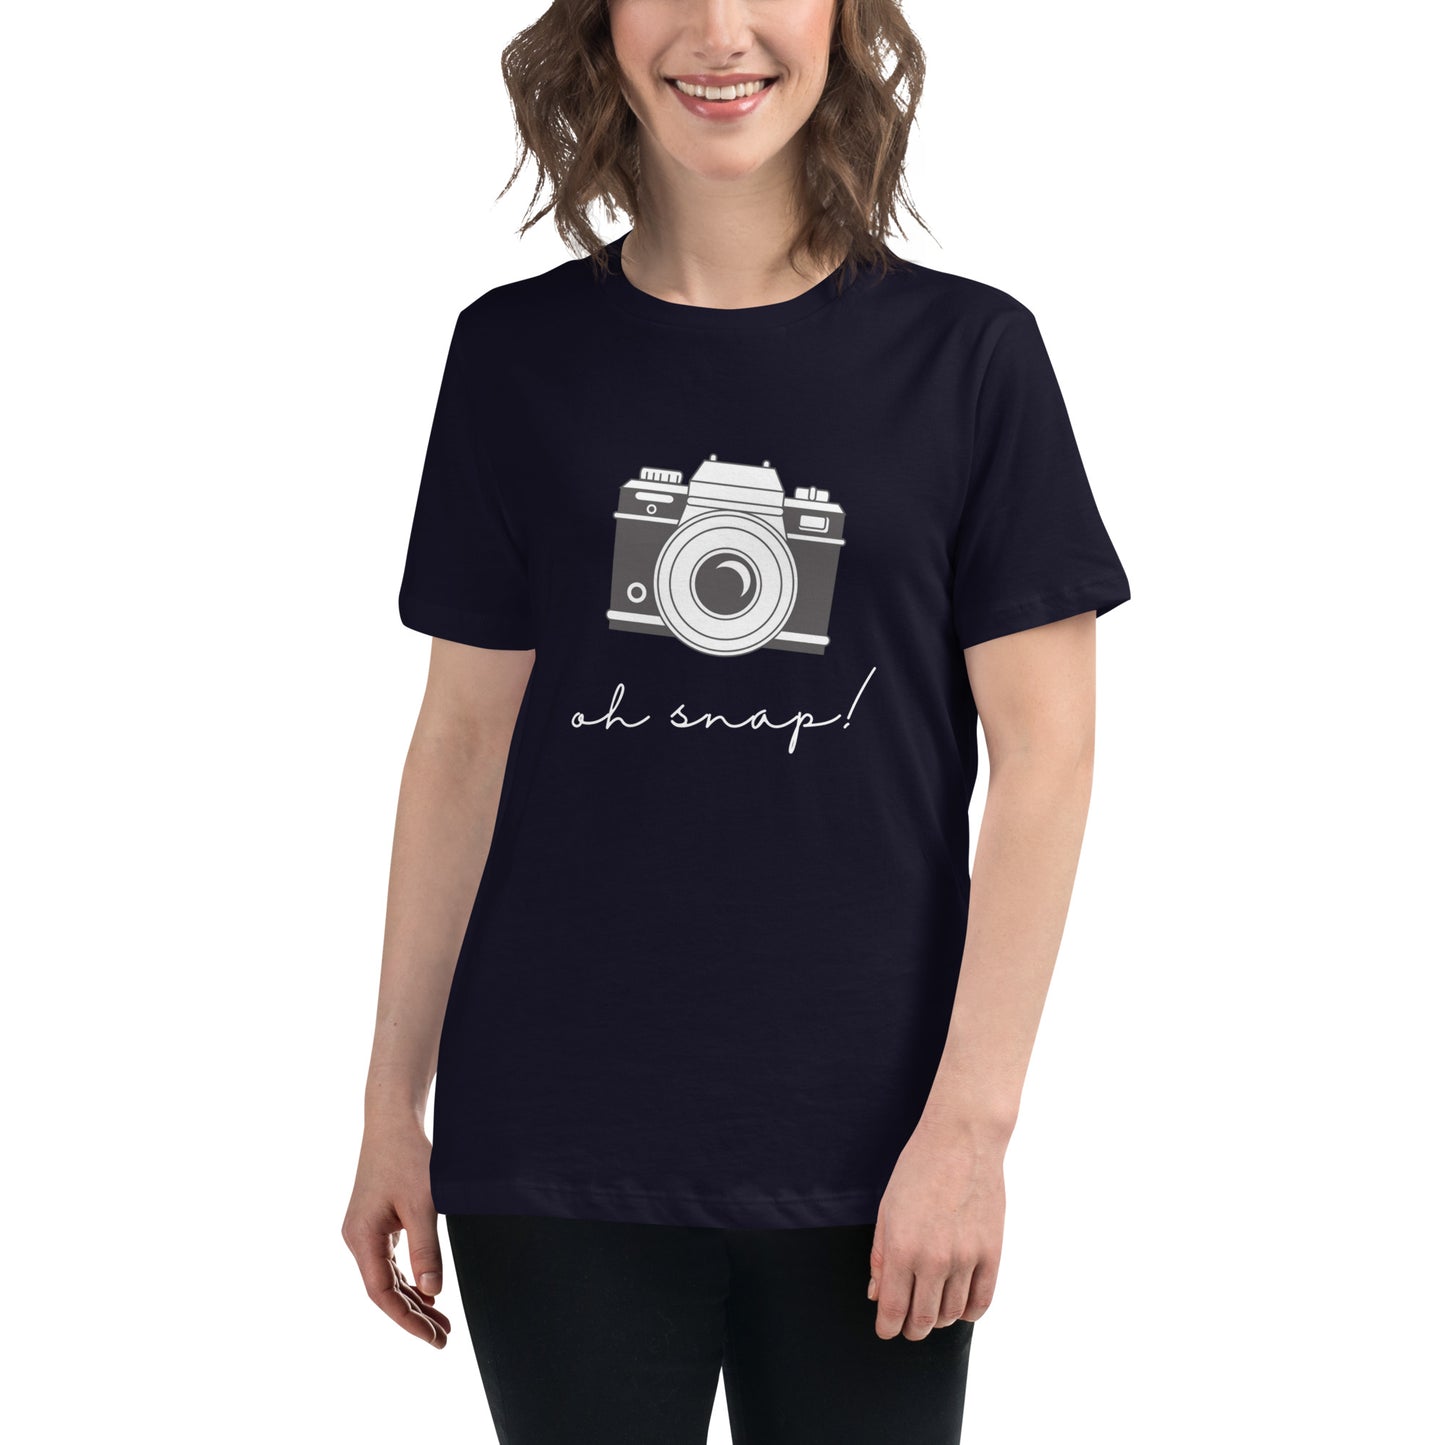 Oh Snap (white print) Women's Relaxed T-Shirt